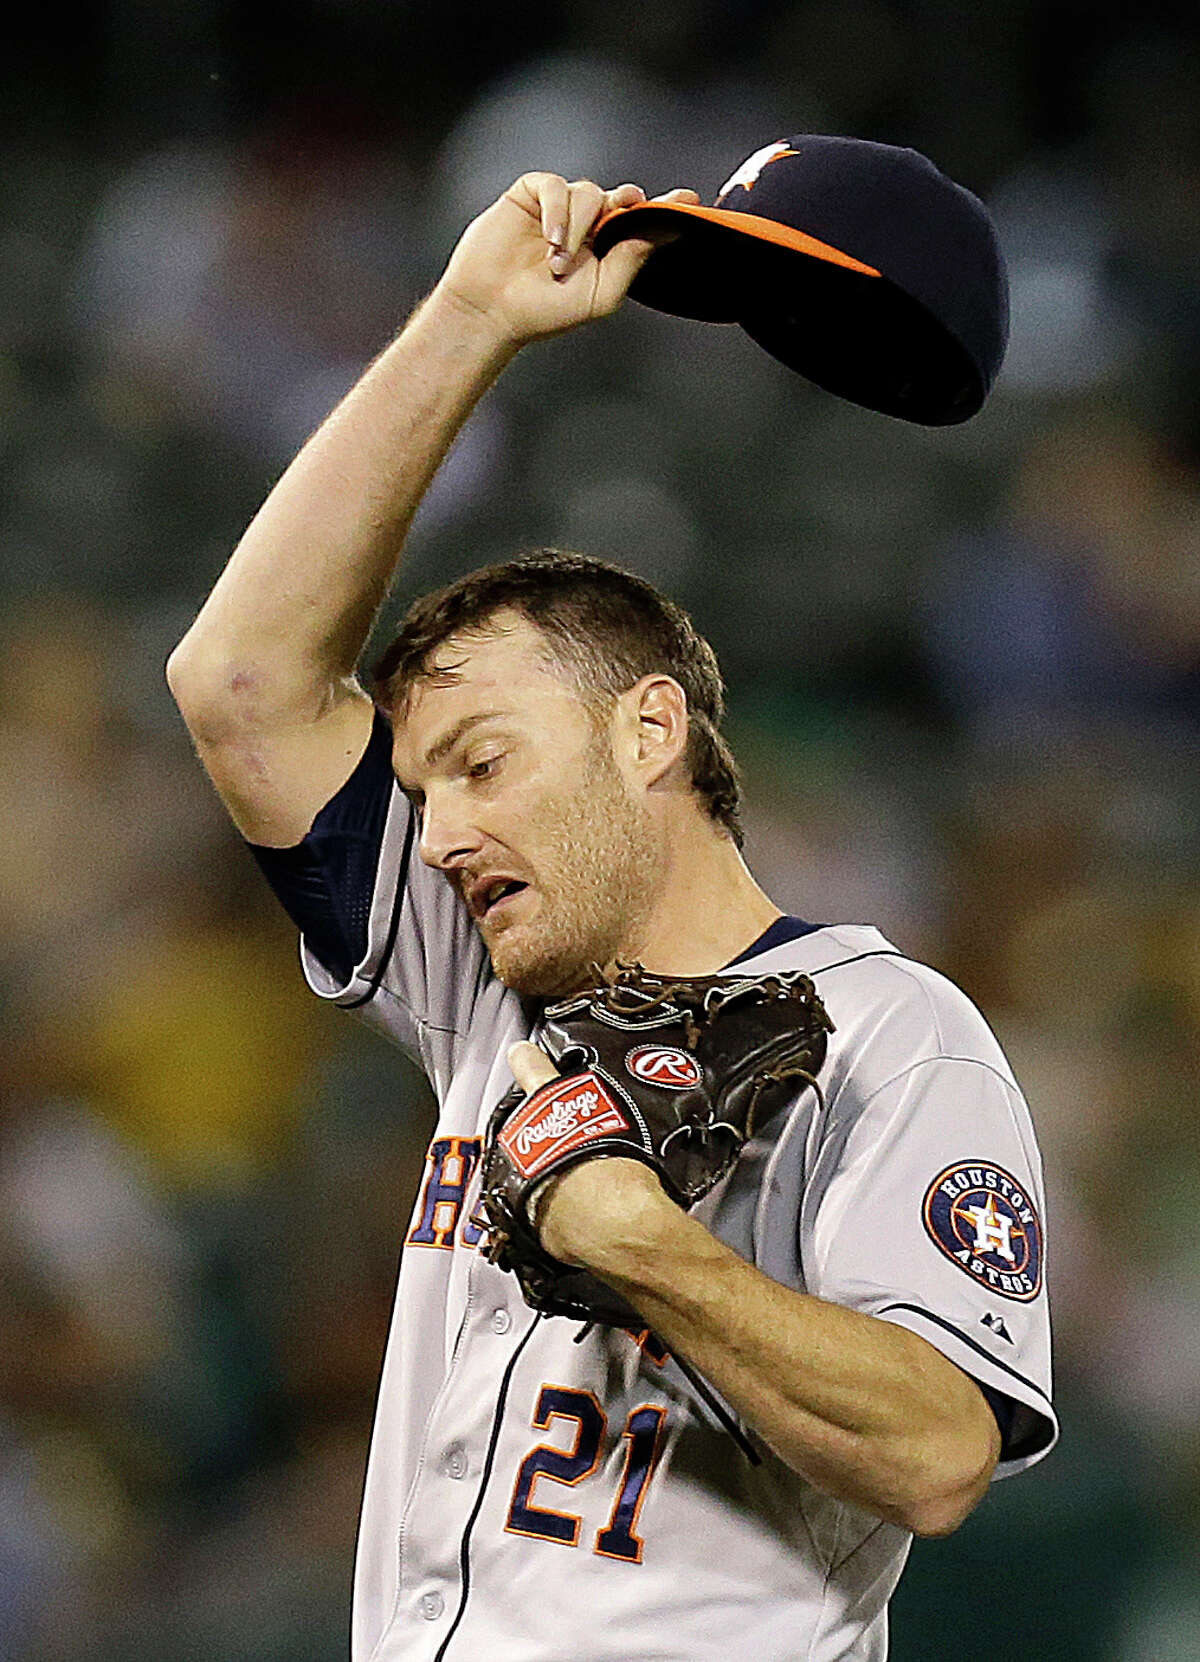 Astros reliever Philip Humber, who gave up two earned runs in 32⁄3 innings, wipes his brow in the seventh.